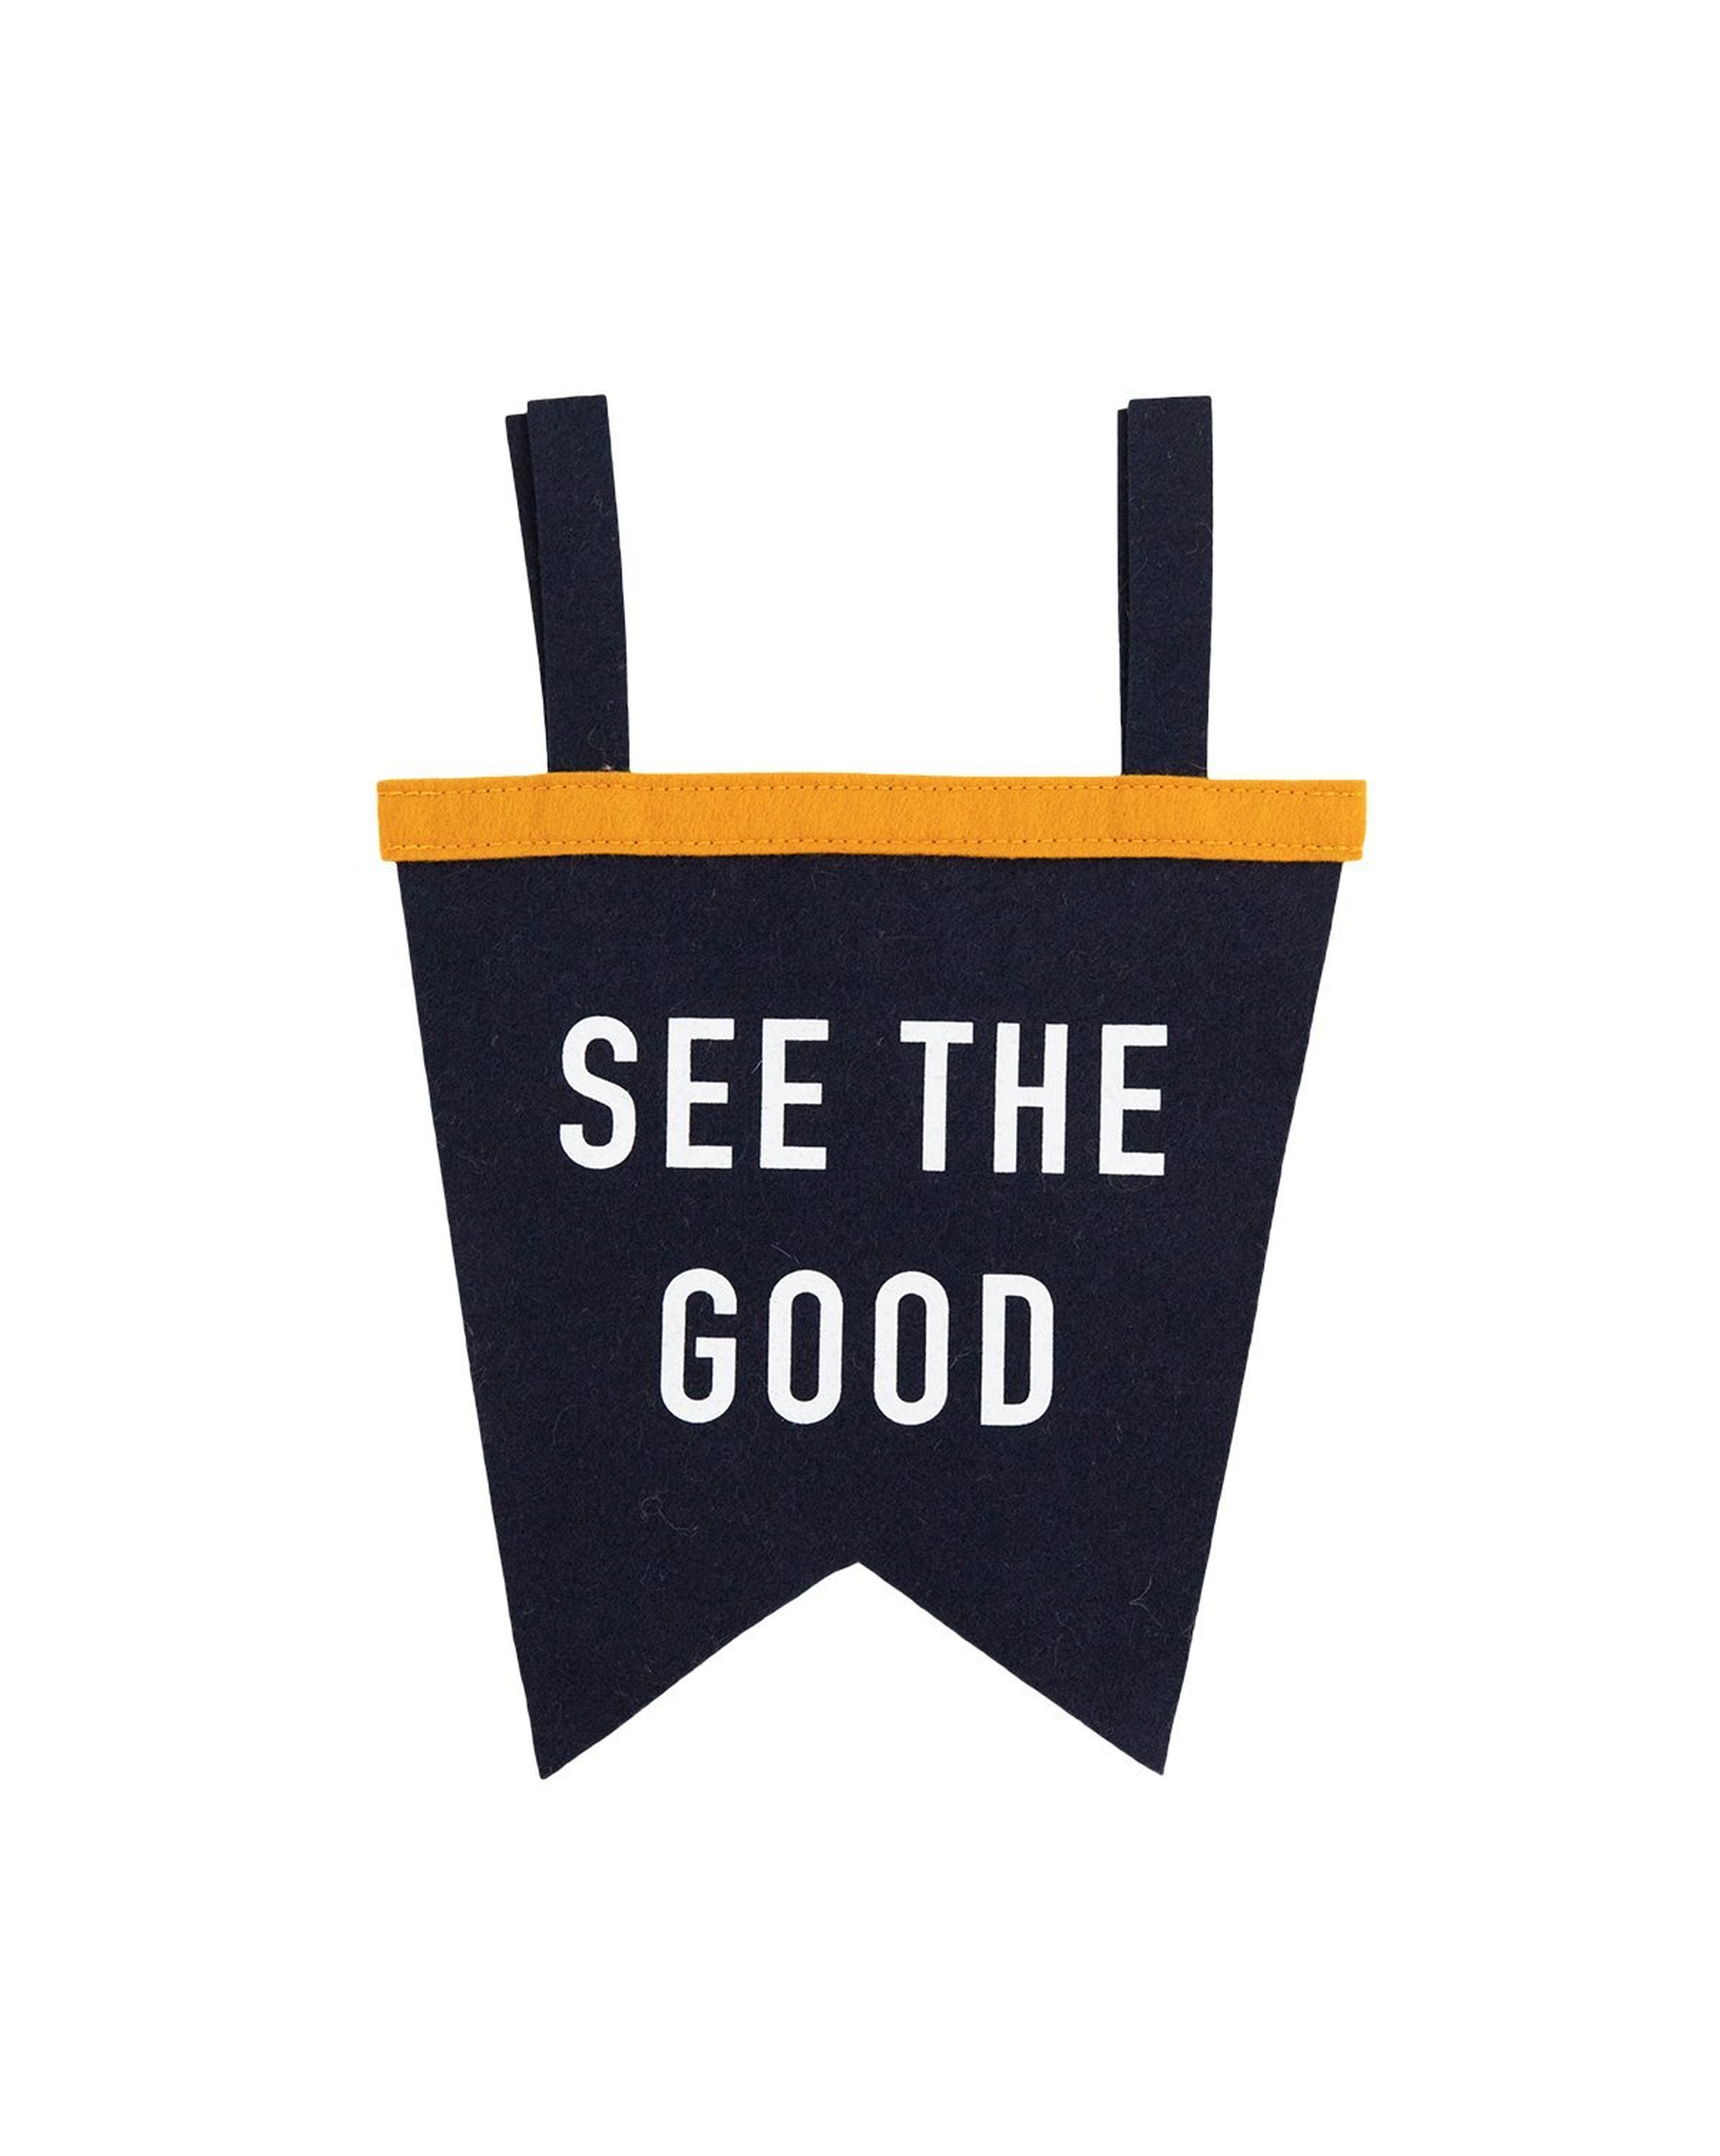 SEE THE GOOD PENNANT - McGee & Co.